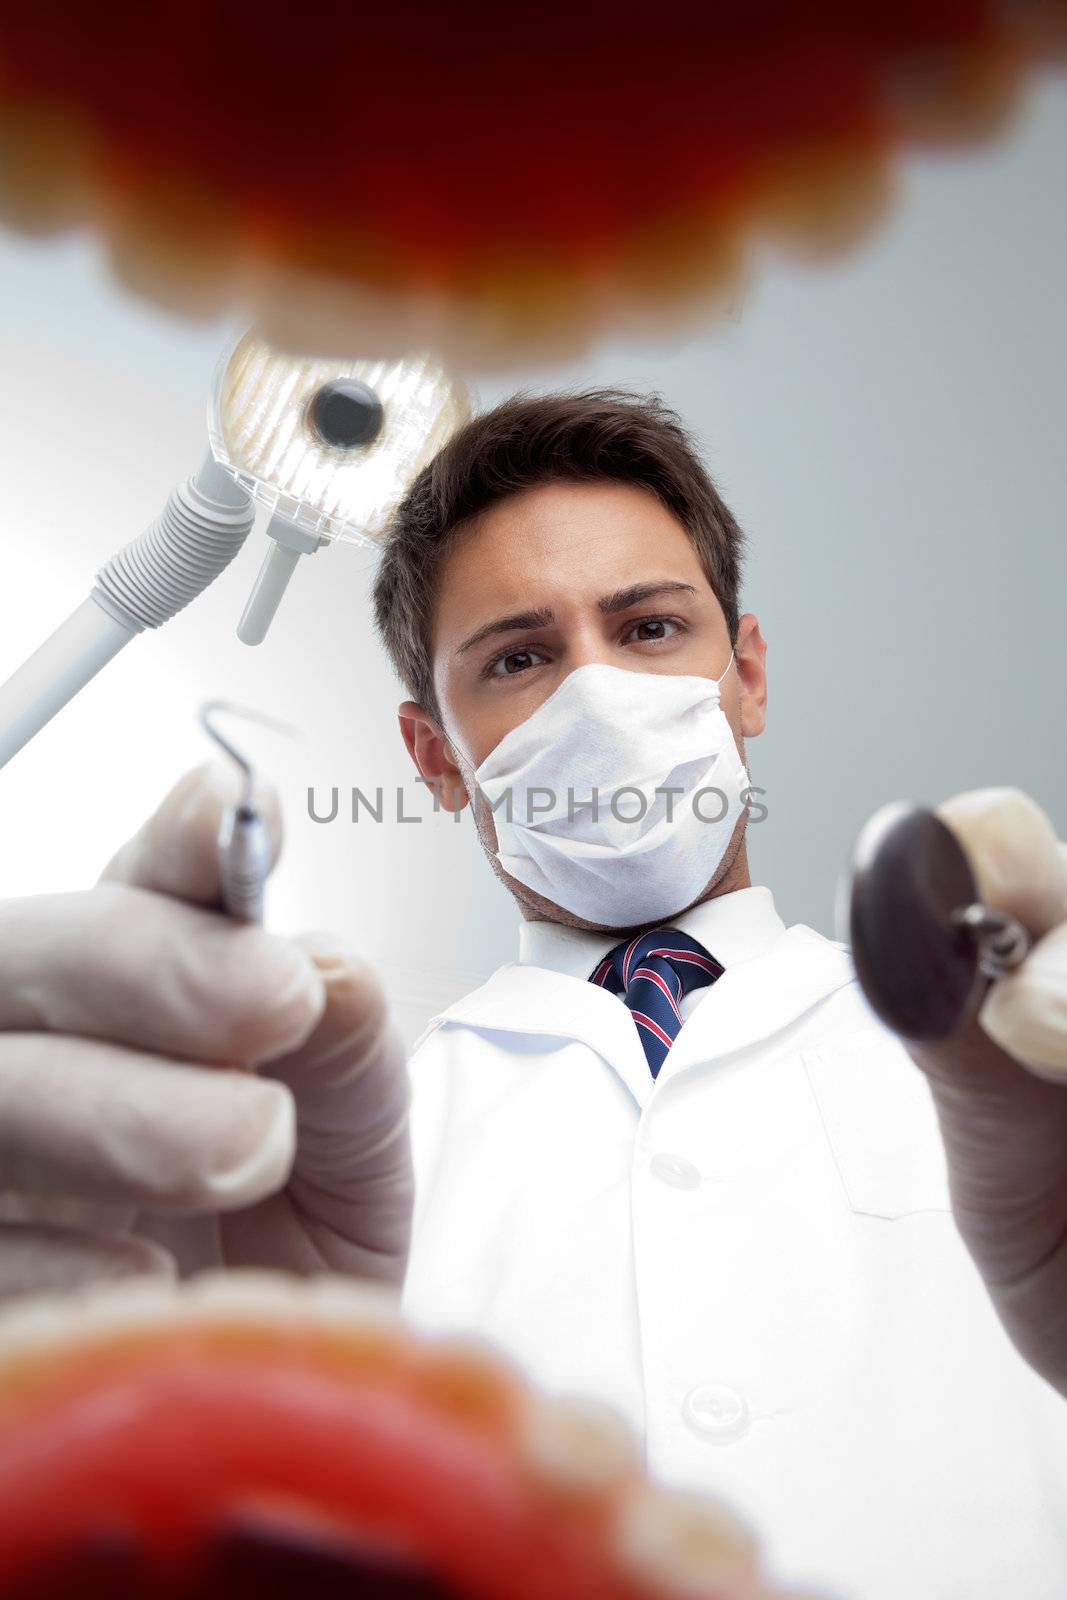 Portrait of young male dentist wearing surgical mask while examining patient's mouth